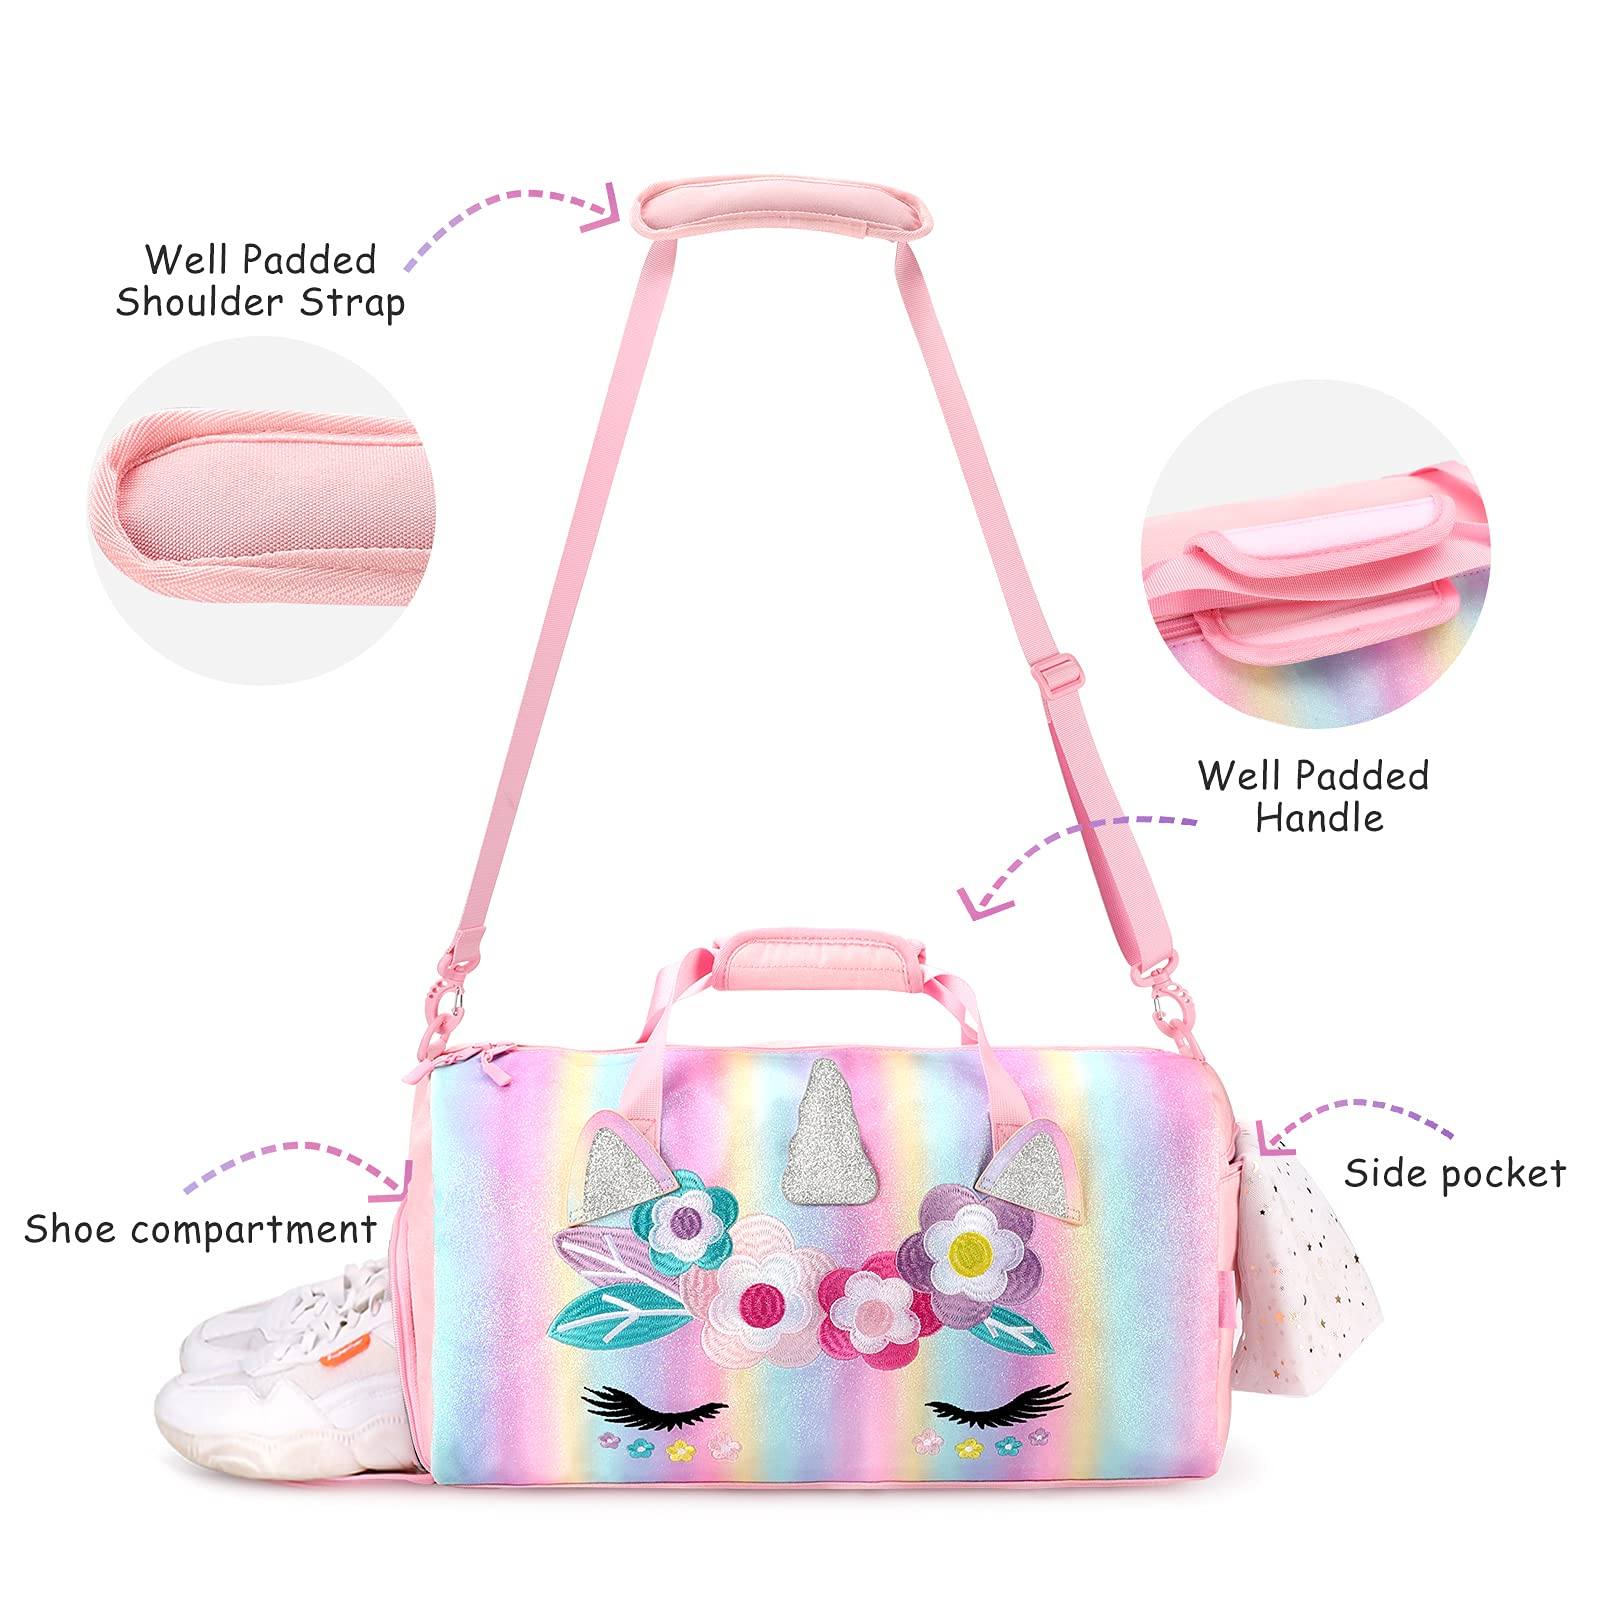 Bodhee Tree Unicorn Fur Duffel Bag for Kids, for Girls, Multipurpose Travel  Bag, Sling Bag Duffel Without Wheels Multicolor - Price in India